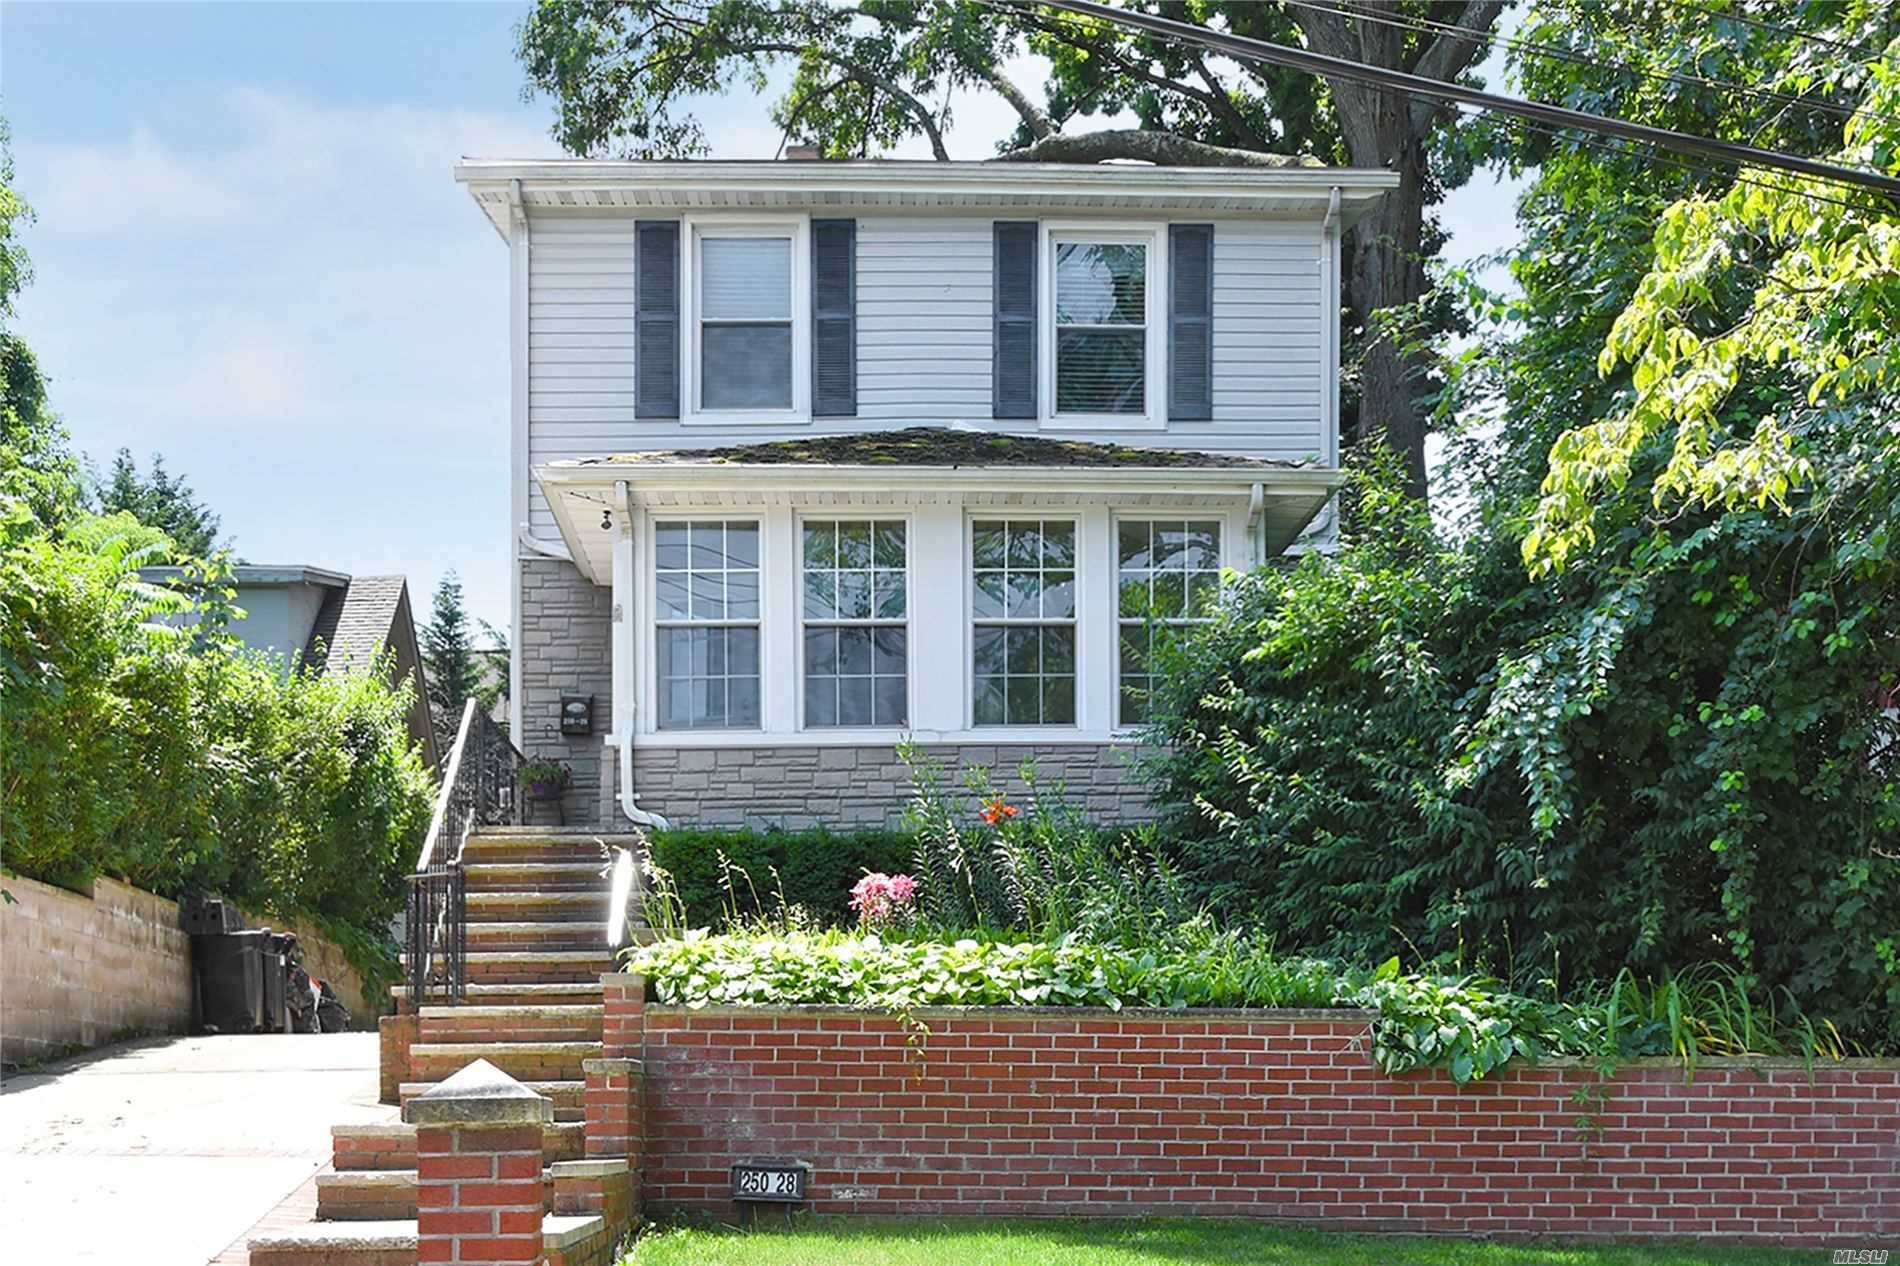 Welcome To This Lovely Recently Renovated Home Located On desirable Little Neck Hills Featuring A Beautiful Enclosed Front Porch, 3 Bedrooms, 3, 5 Baths, A Fabulous Modern EIK W Stainless ...